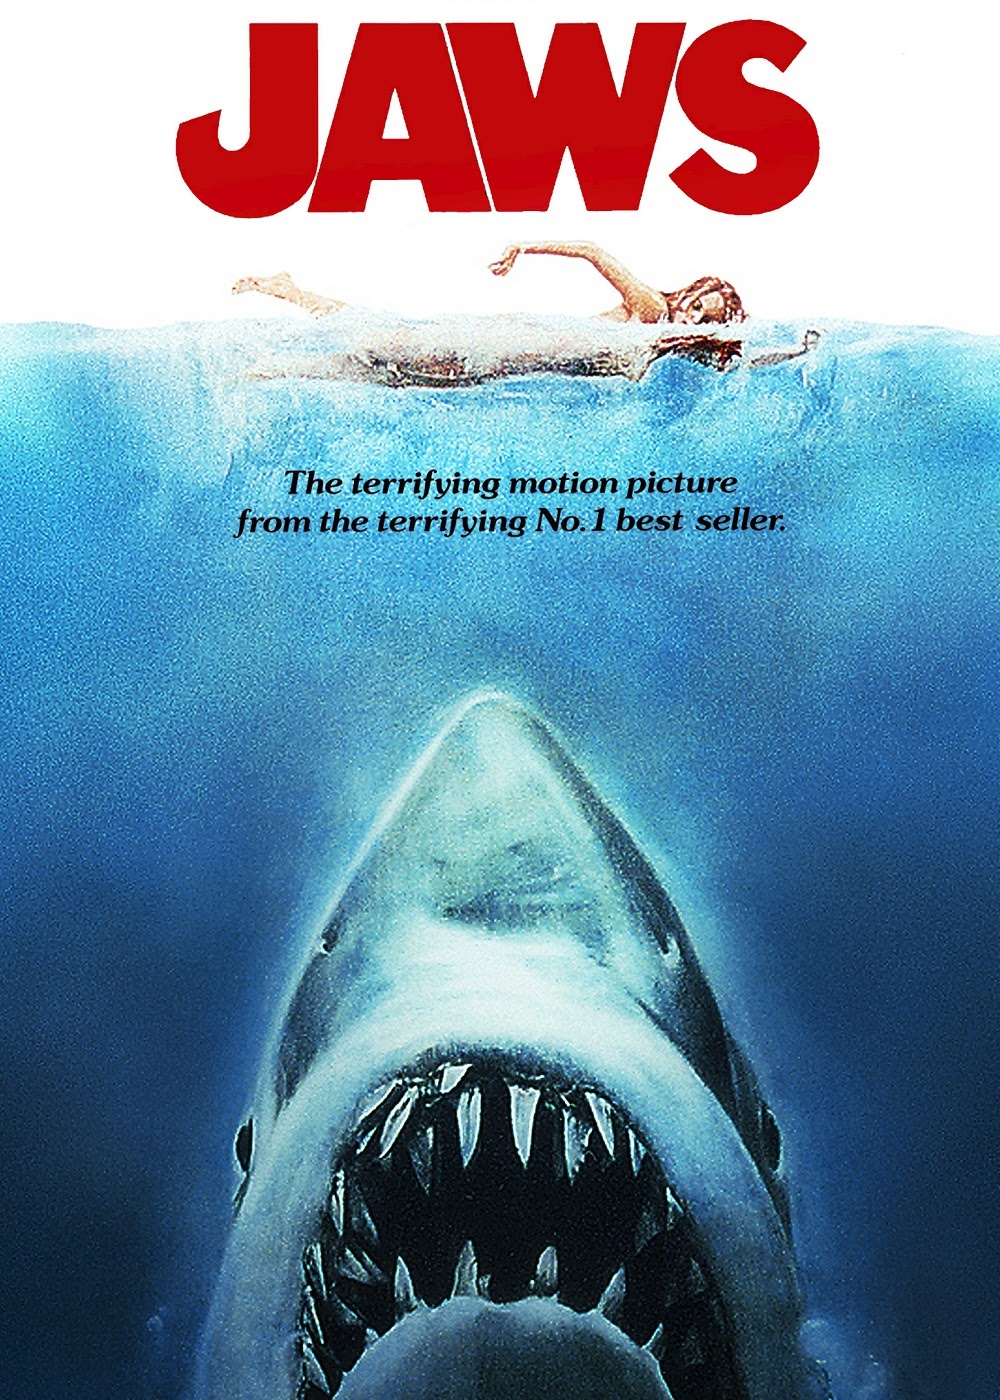 Jaws release date